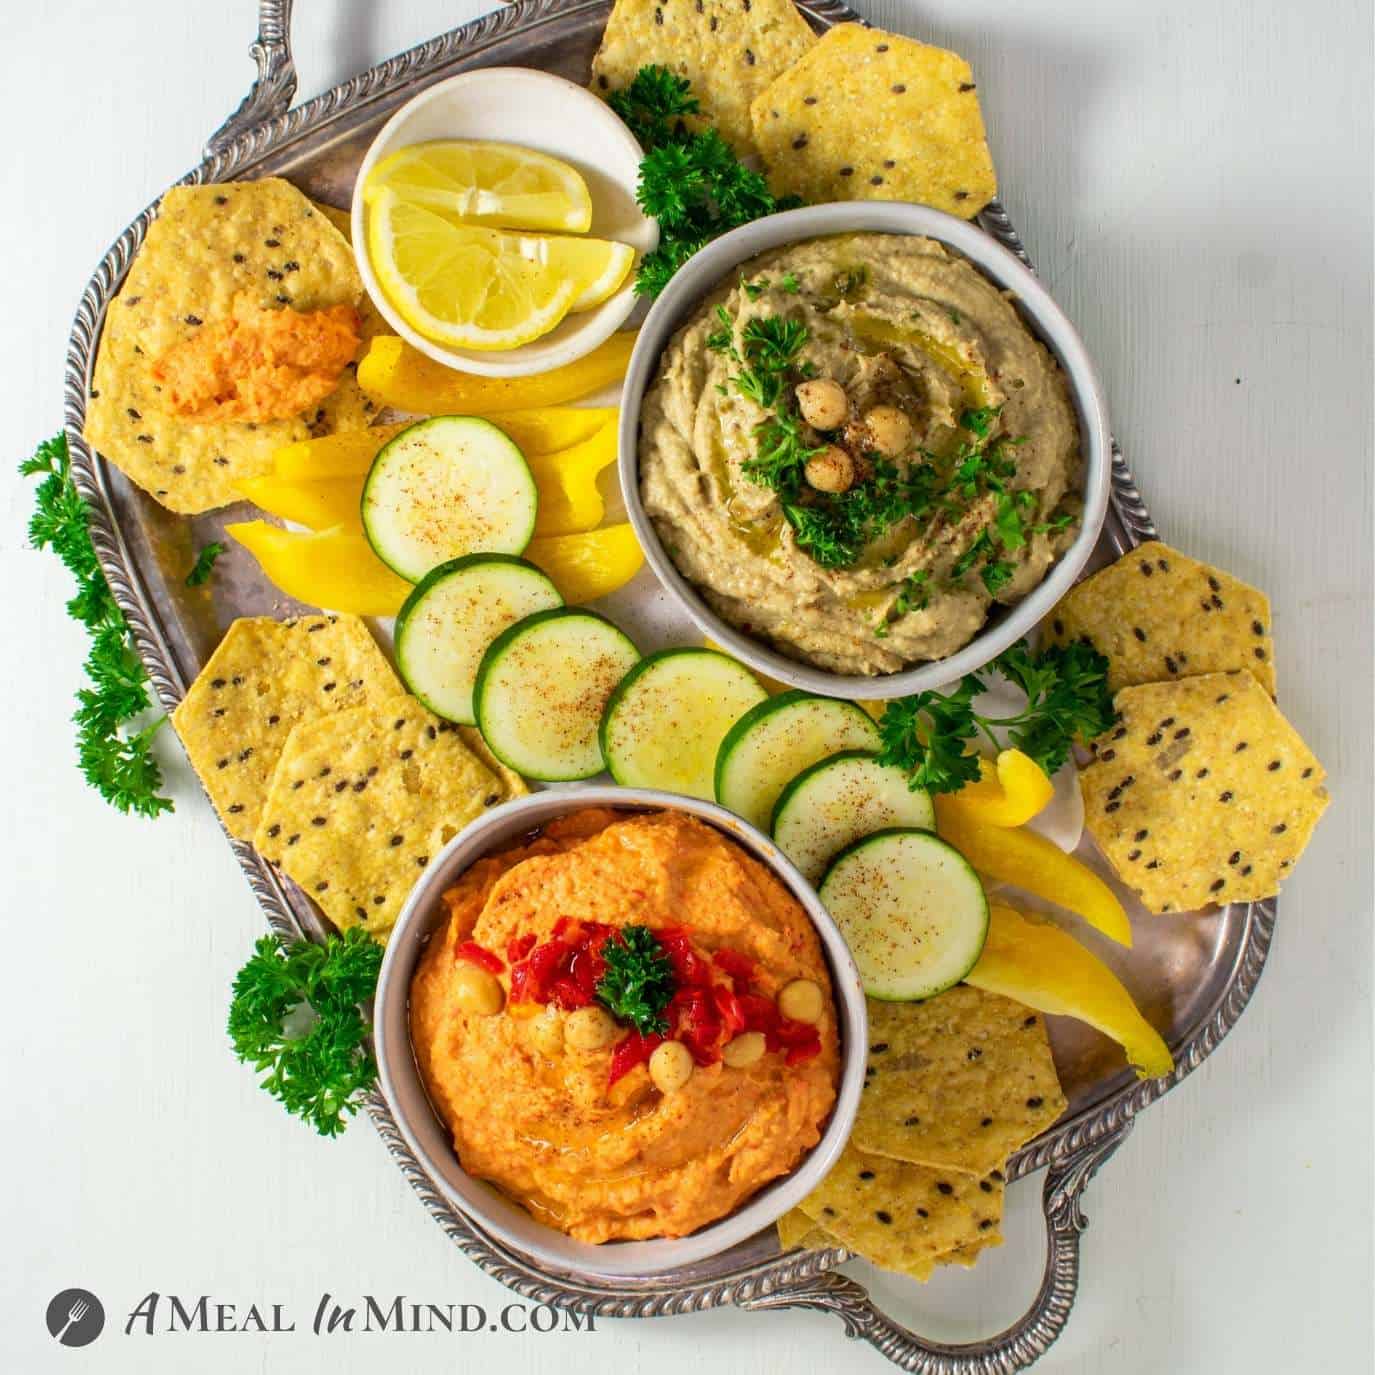 Eggplant and Red Bell Pepper Hummus Platter